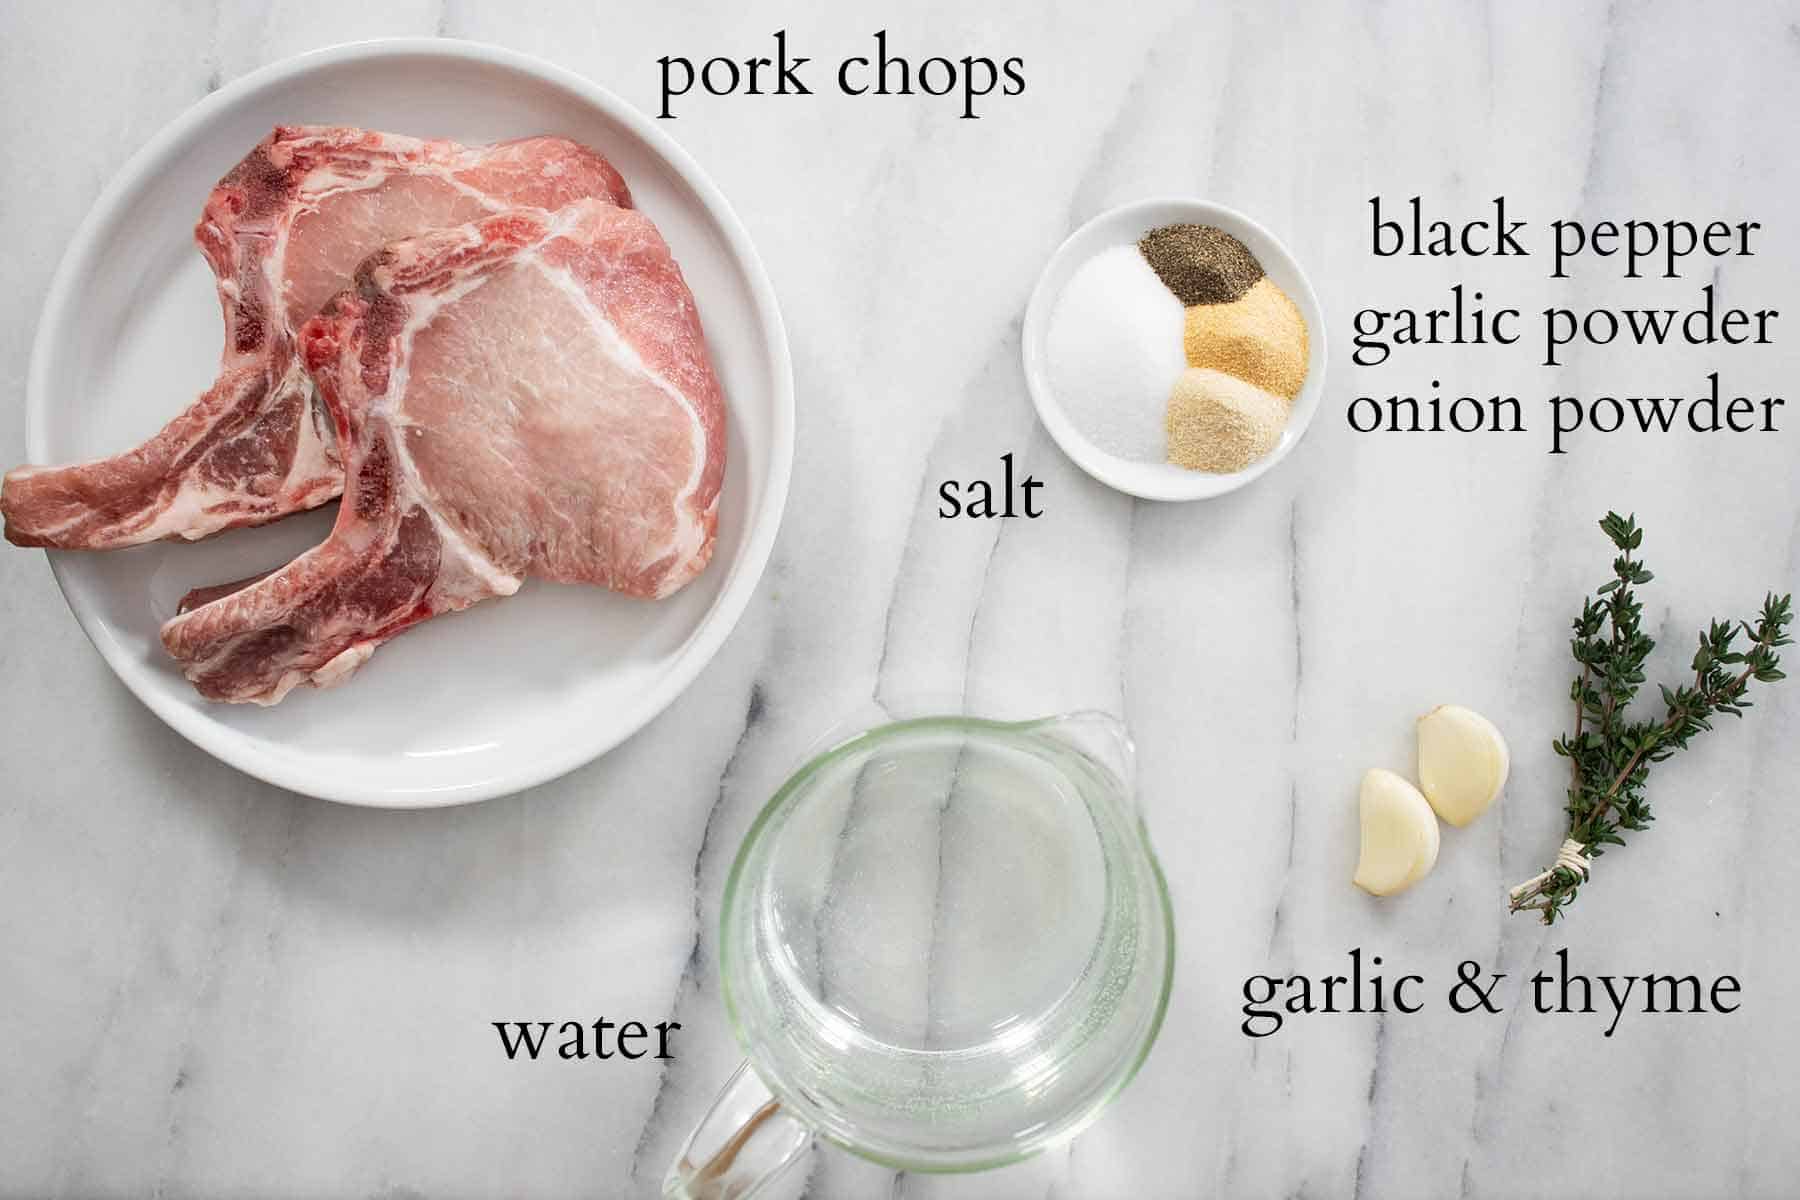 all the ingredients needed to make delicious boiled pork chops.